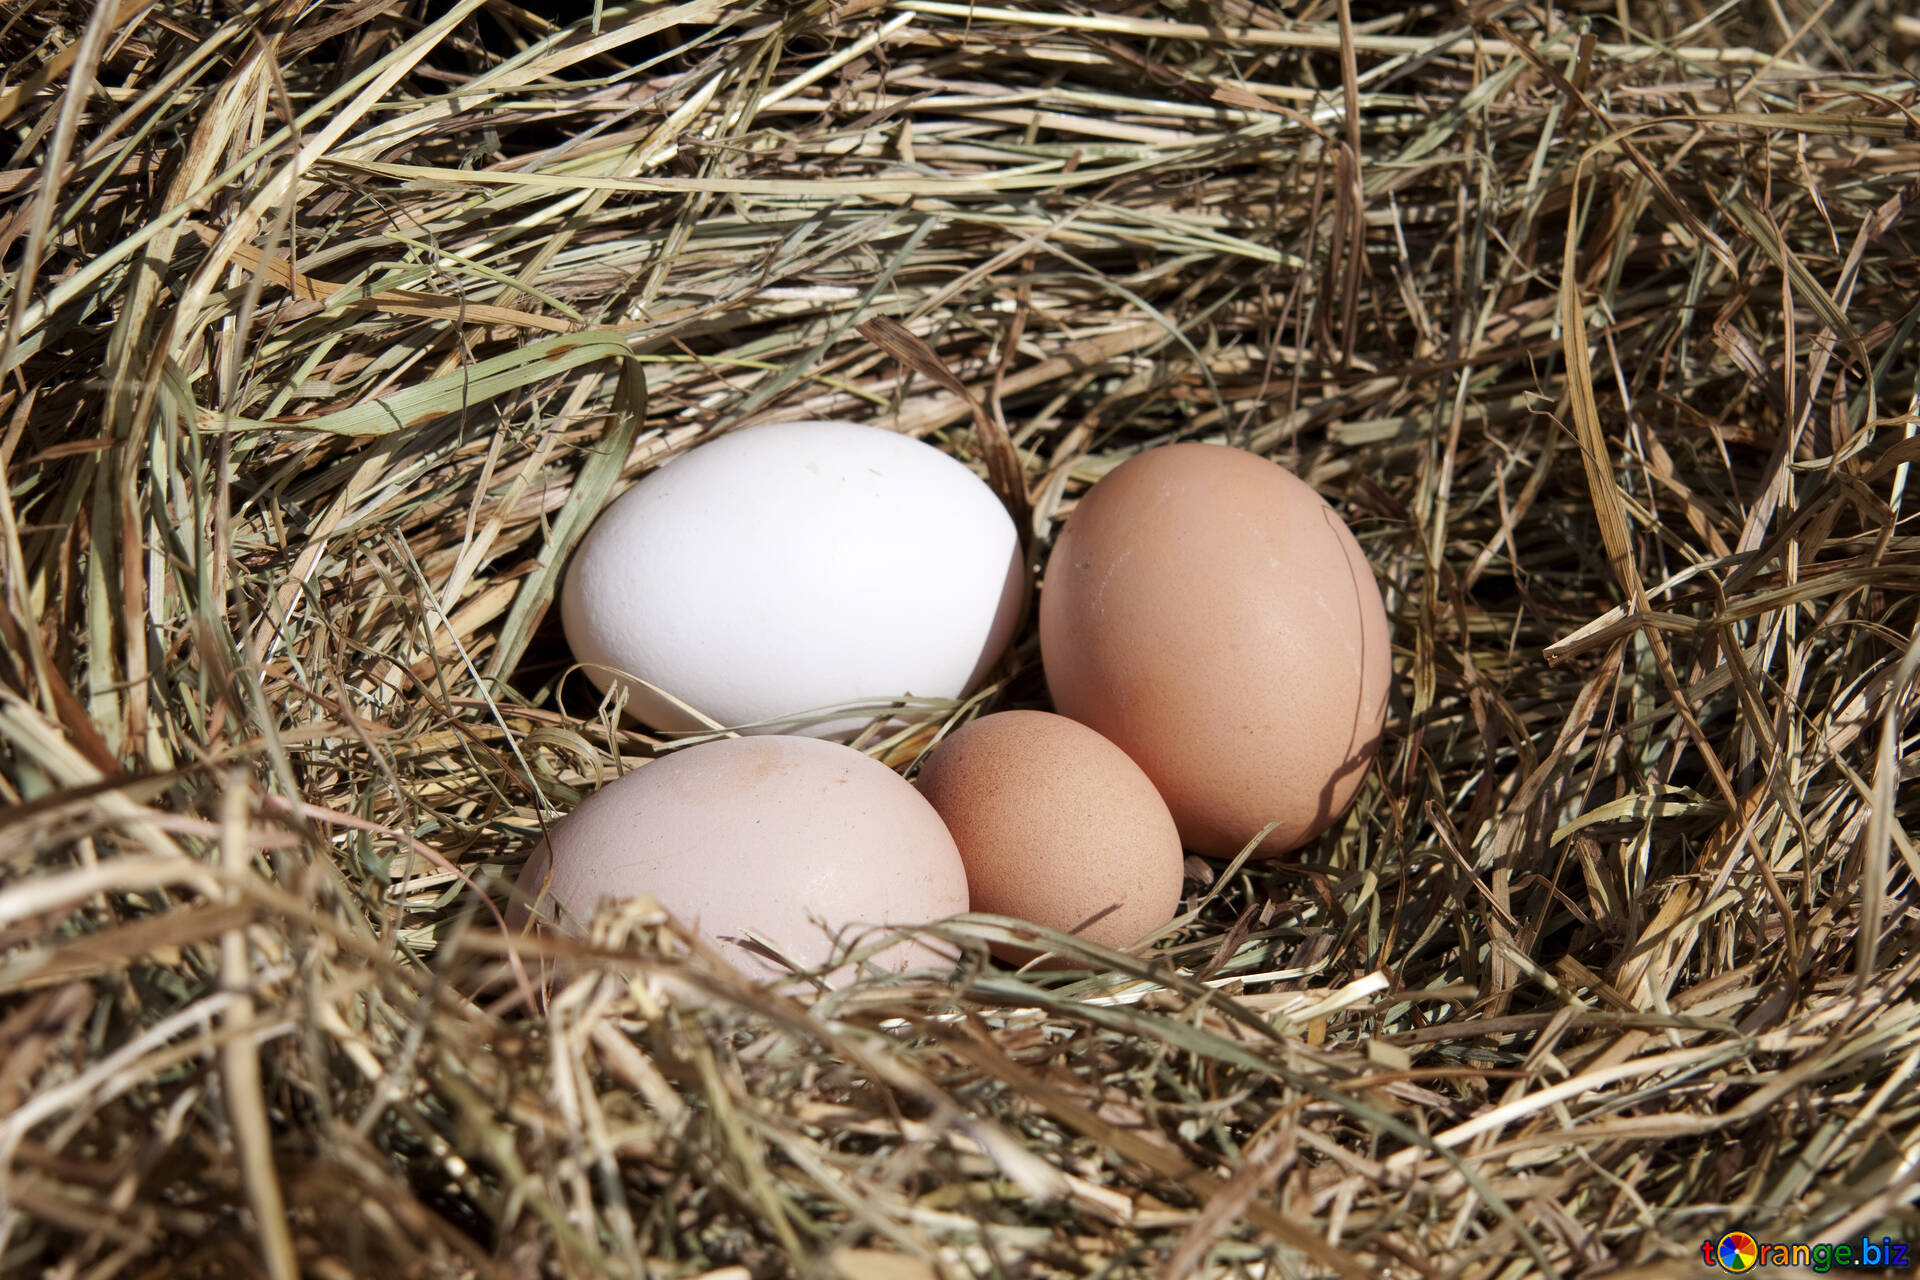 Eggs in the nest free image № 1069